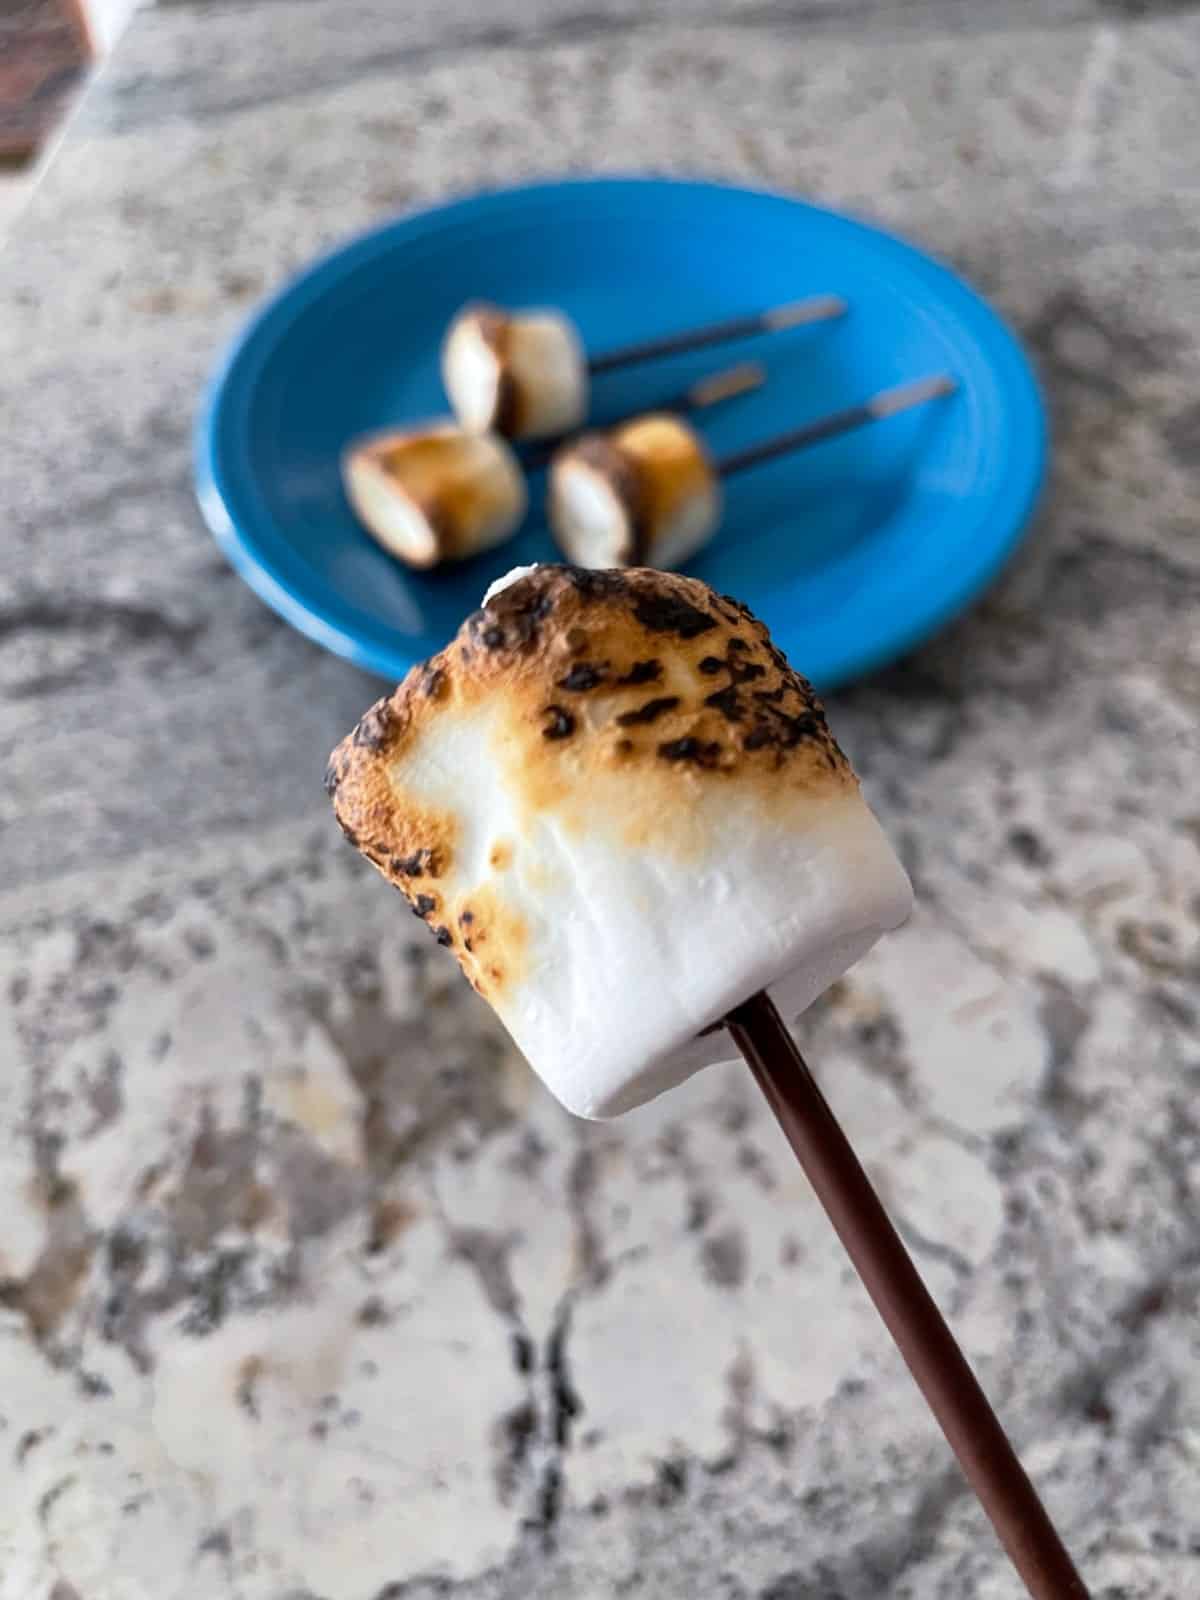 Pocky s'mores stick up close with platter of smores sticks on blue plate in background.